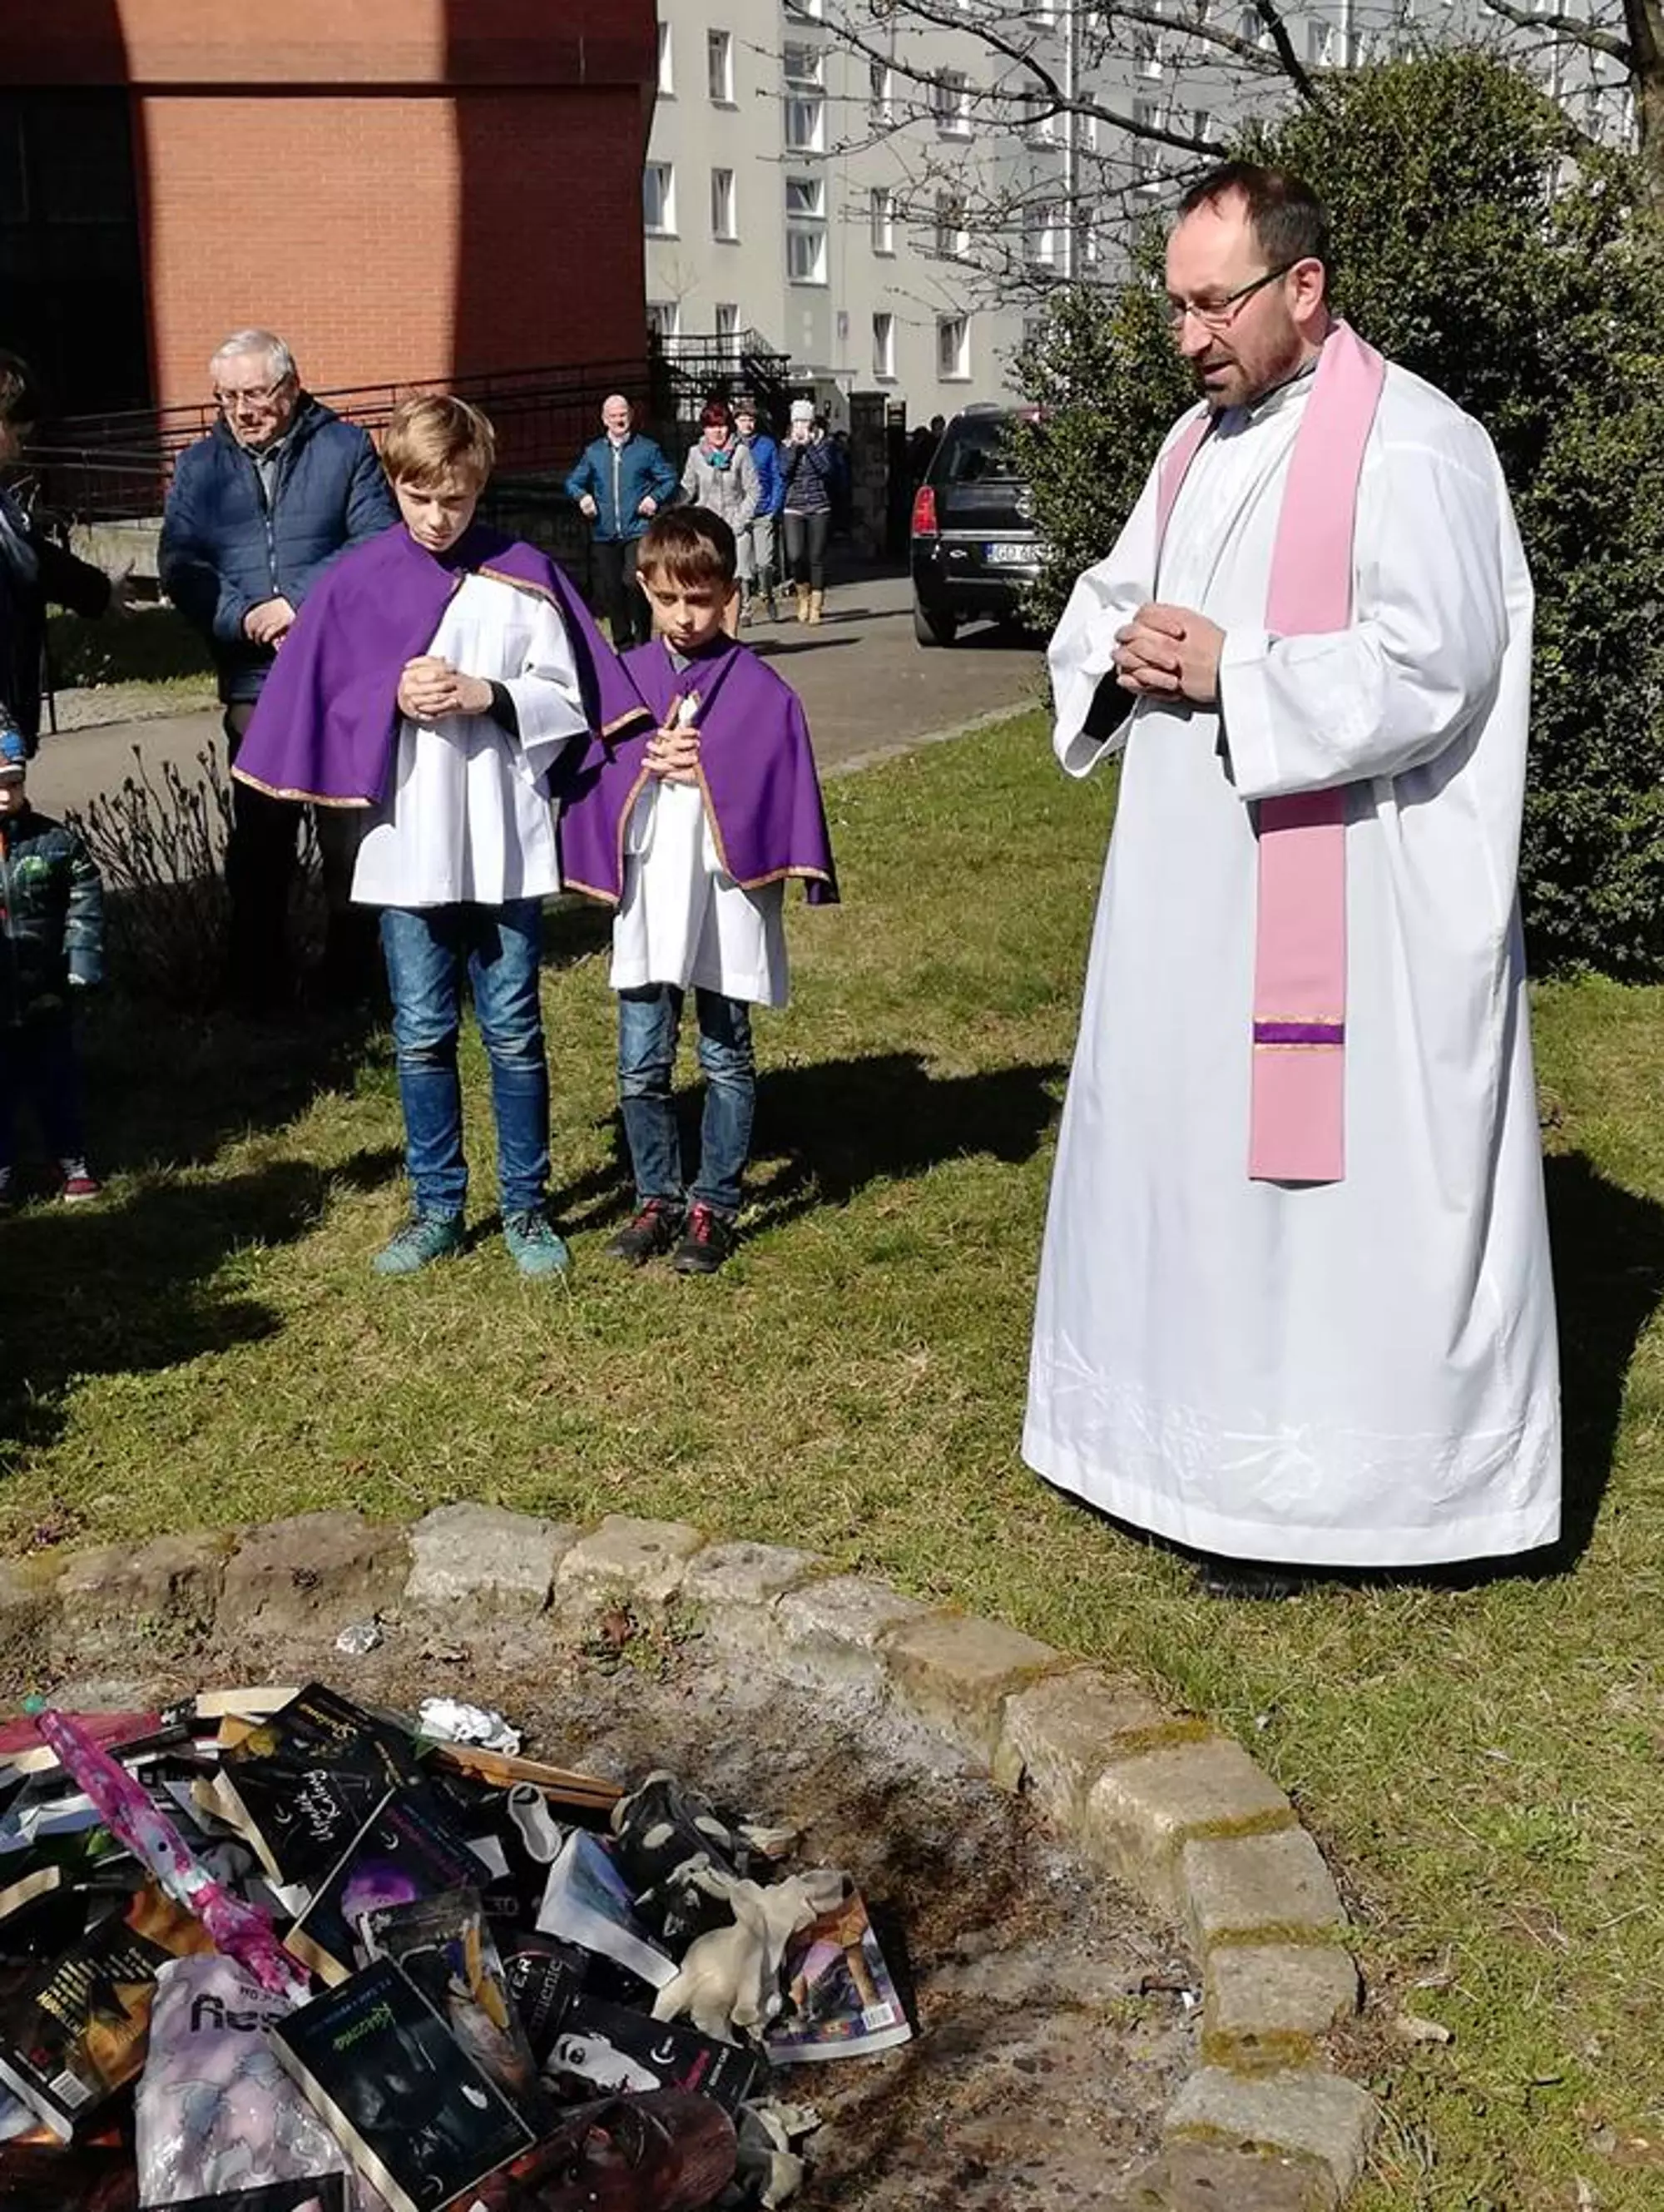 Priests and altar boys helped burn the books.